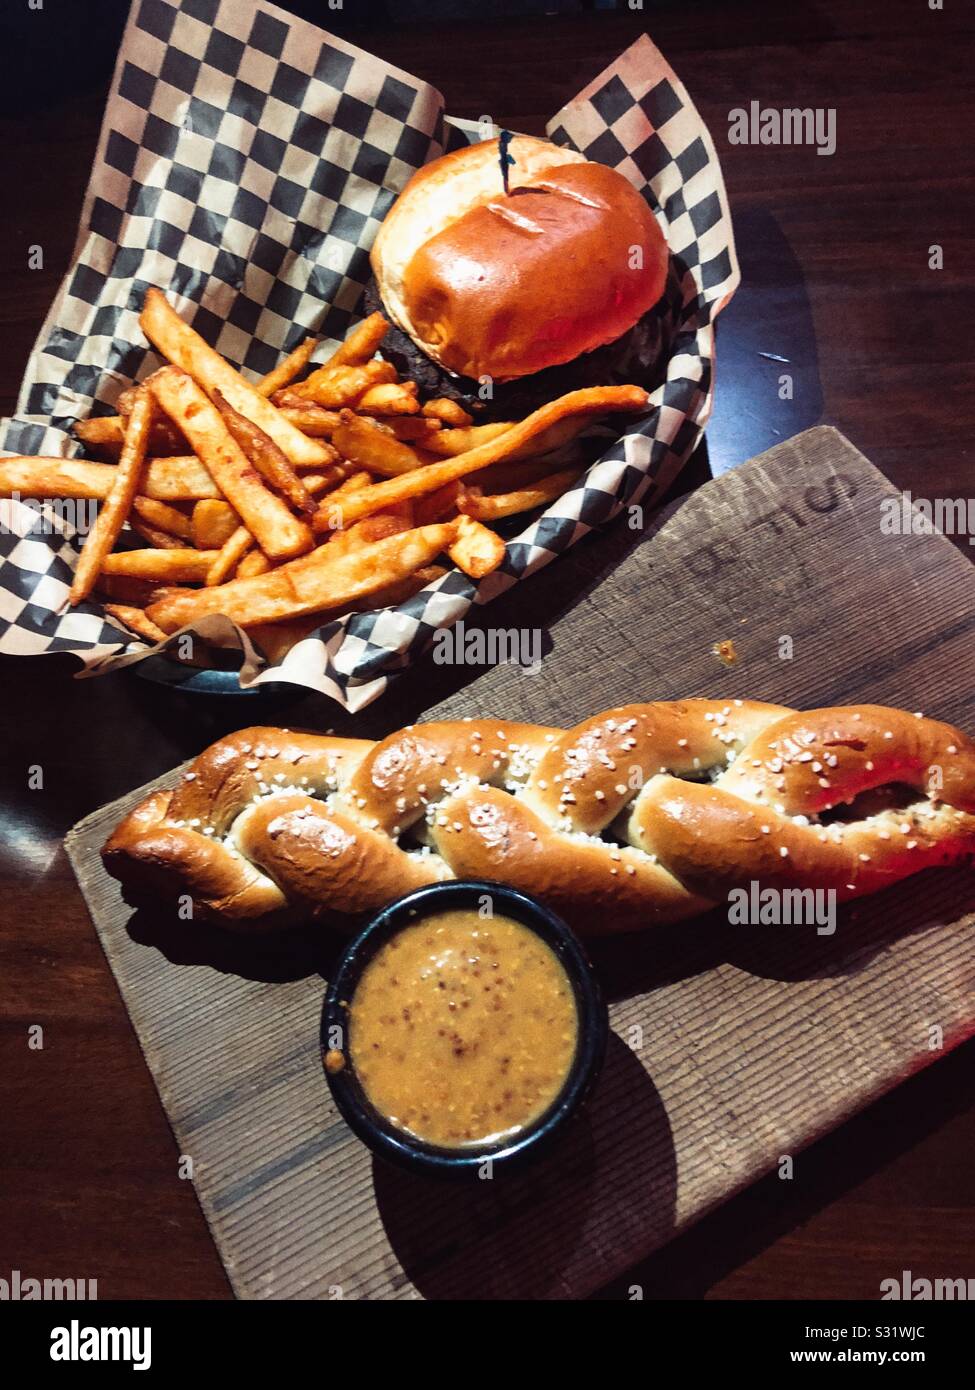 Great accompaniment for a beer - burger, fries and pretzel Stock Photo